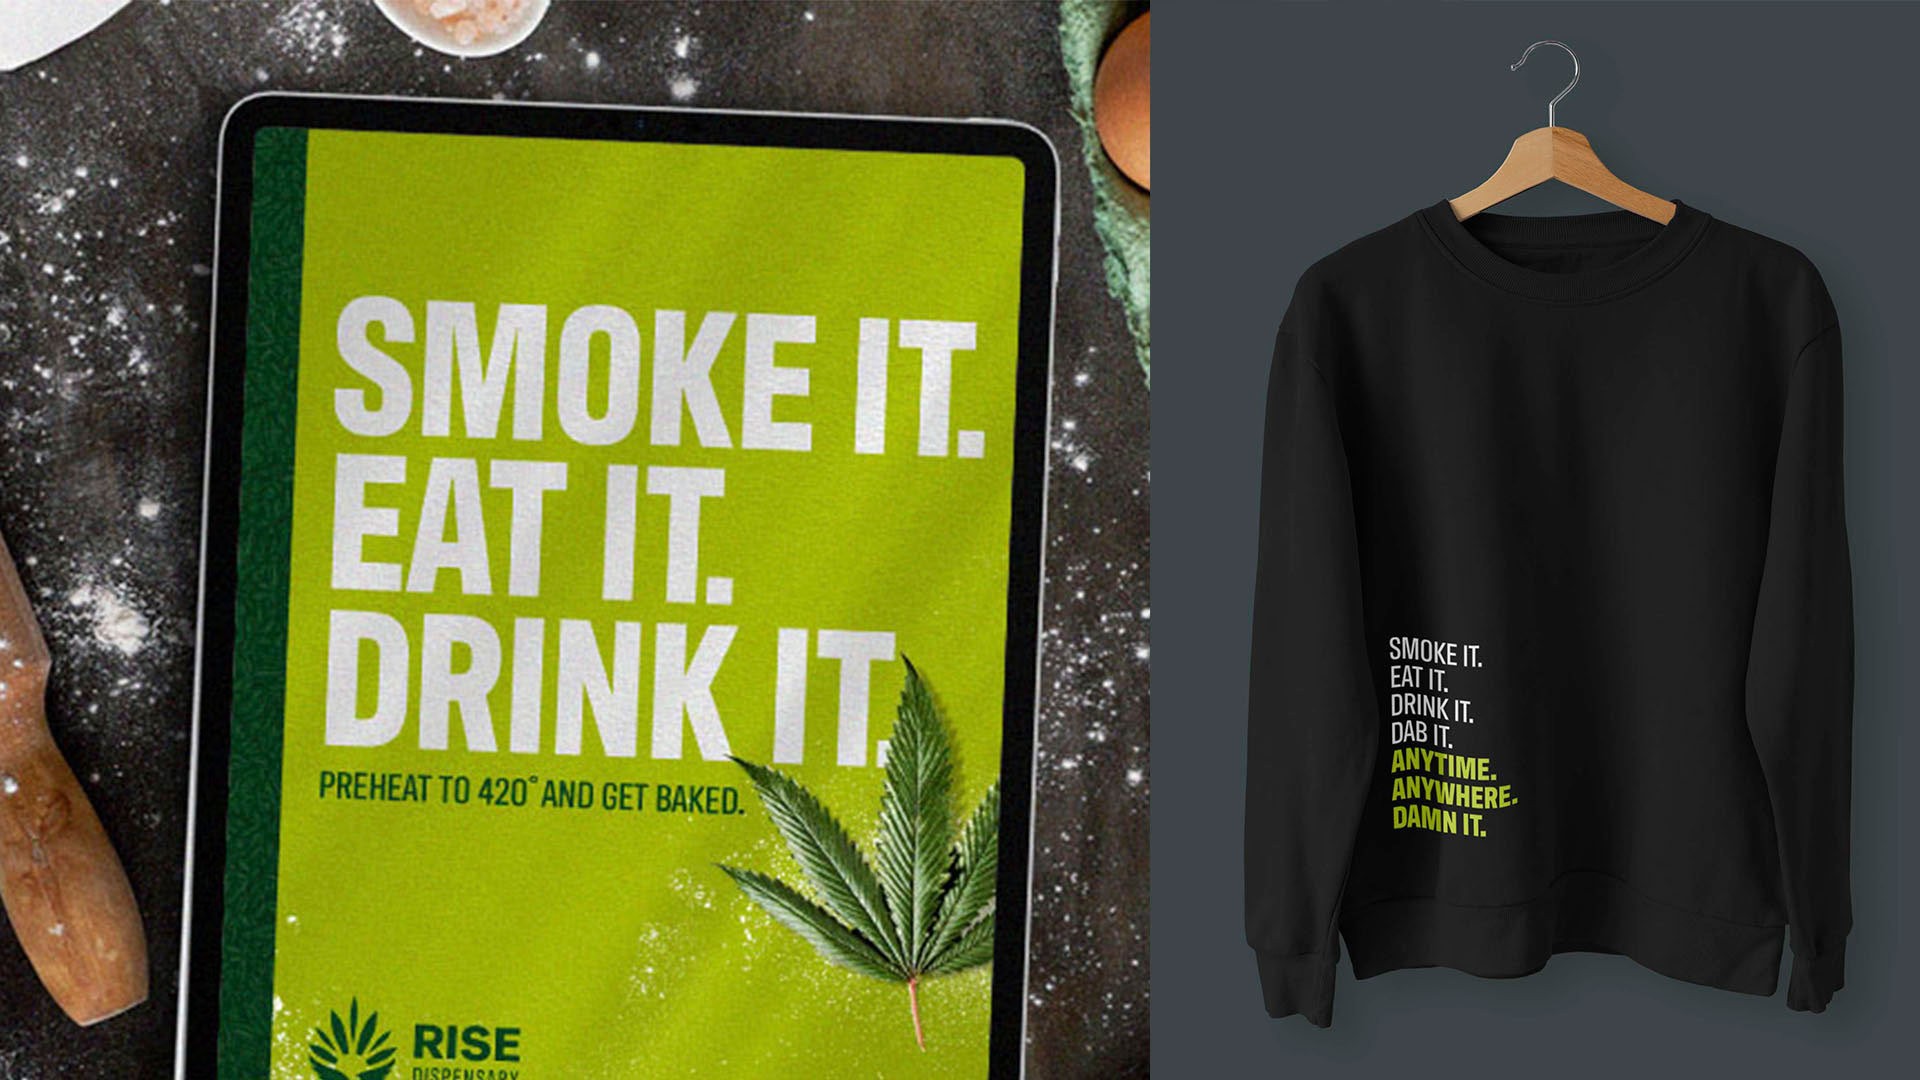 The 420 cookbook is shown on the left, a RISE sweater on the right